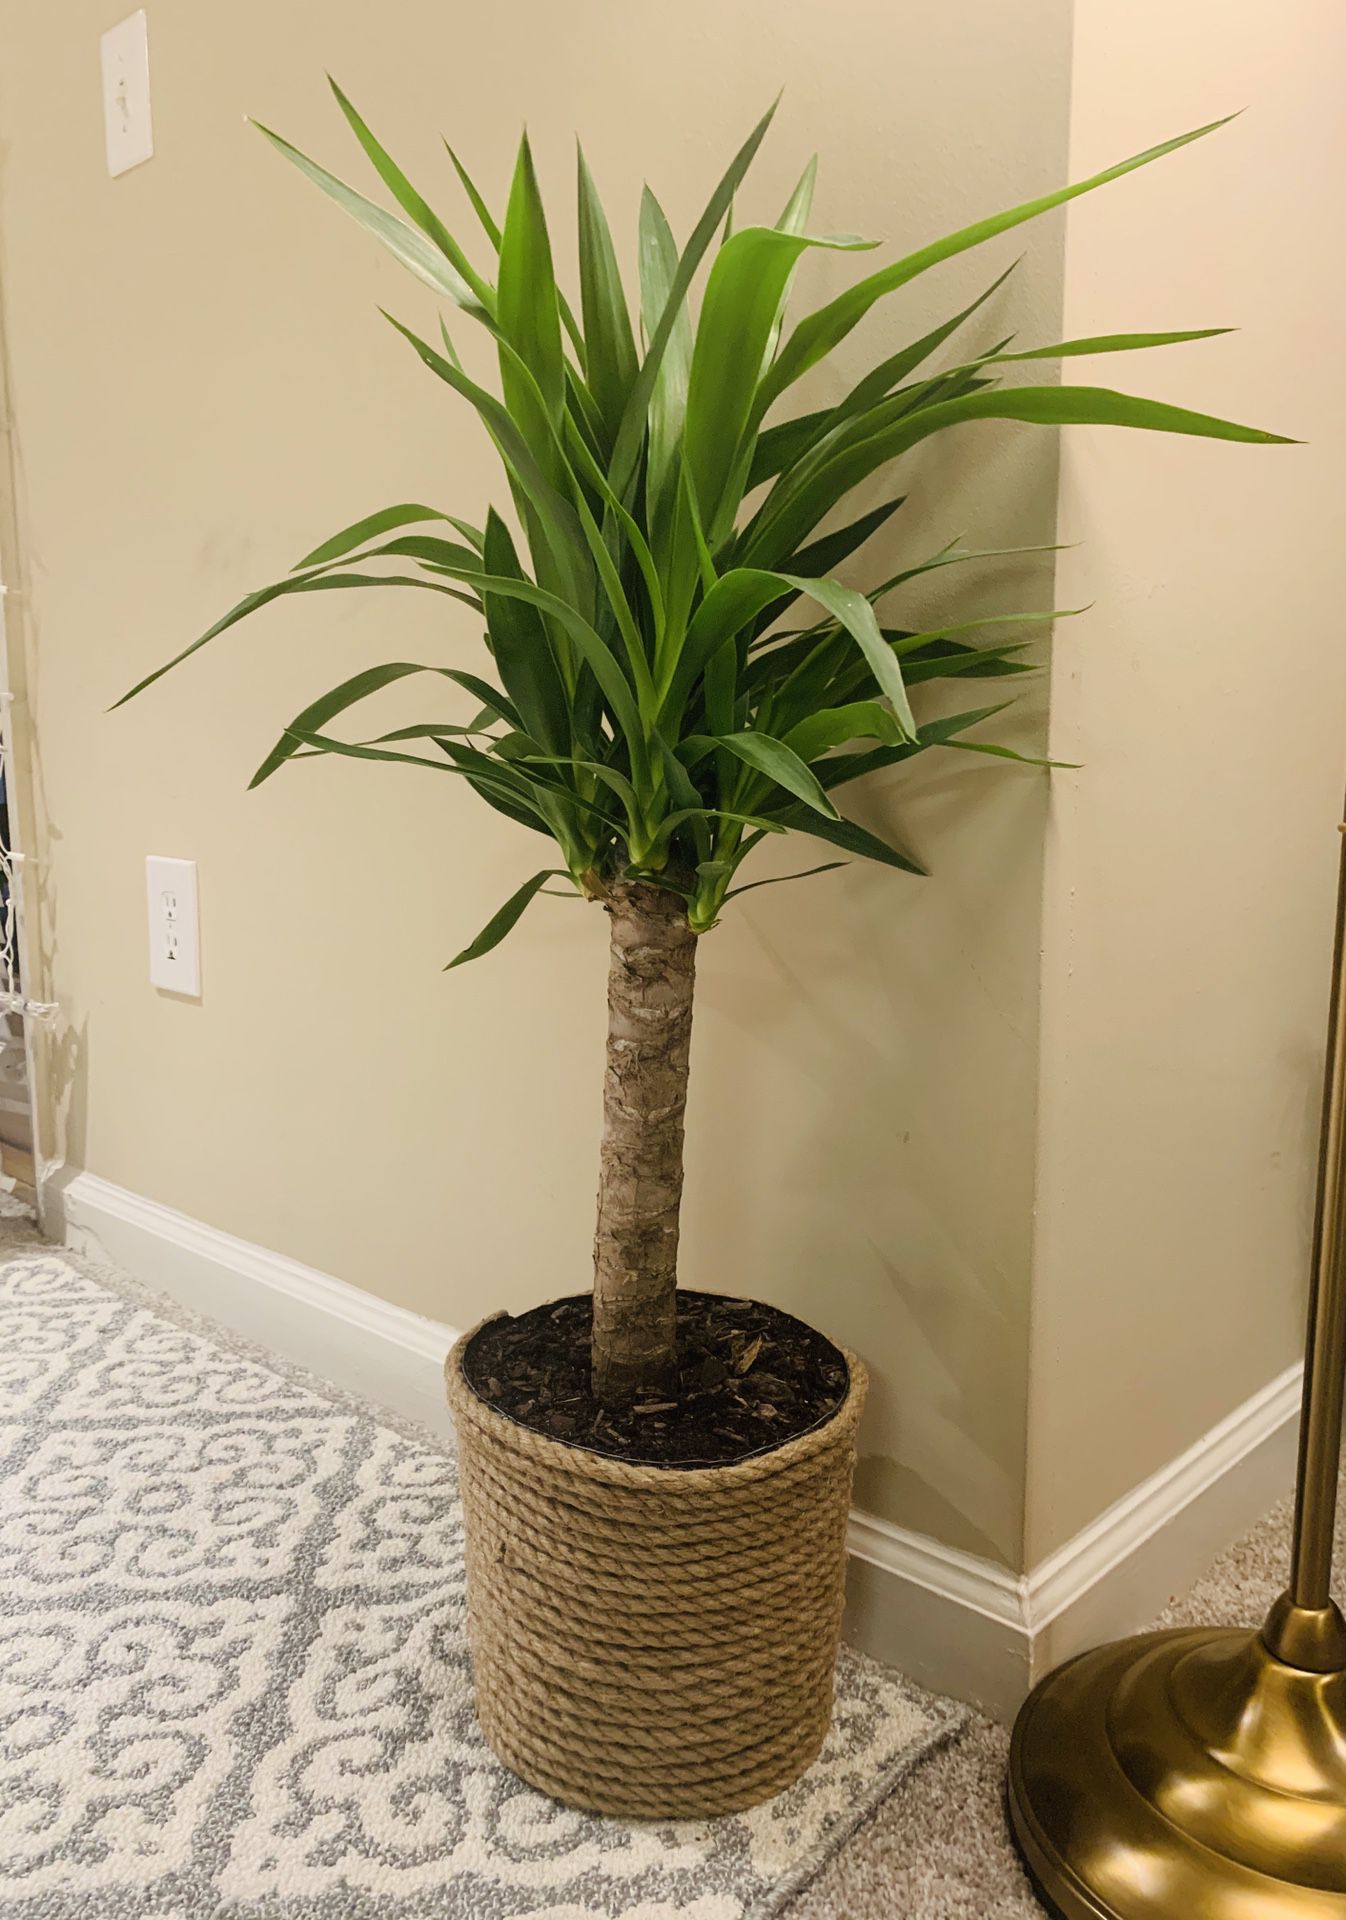 Yucca (house plant)